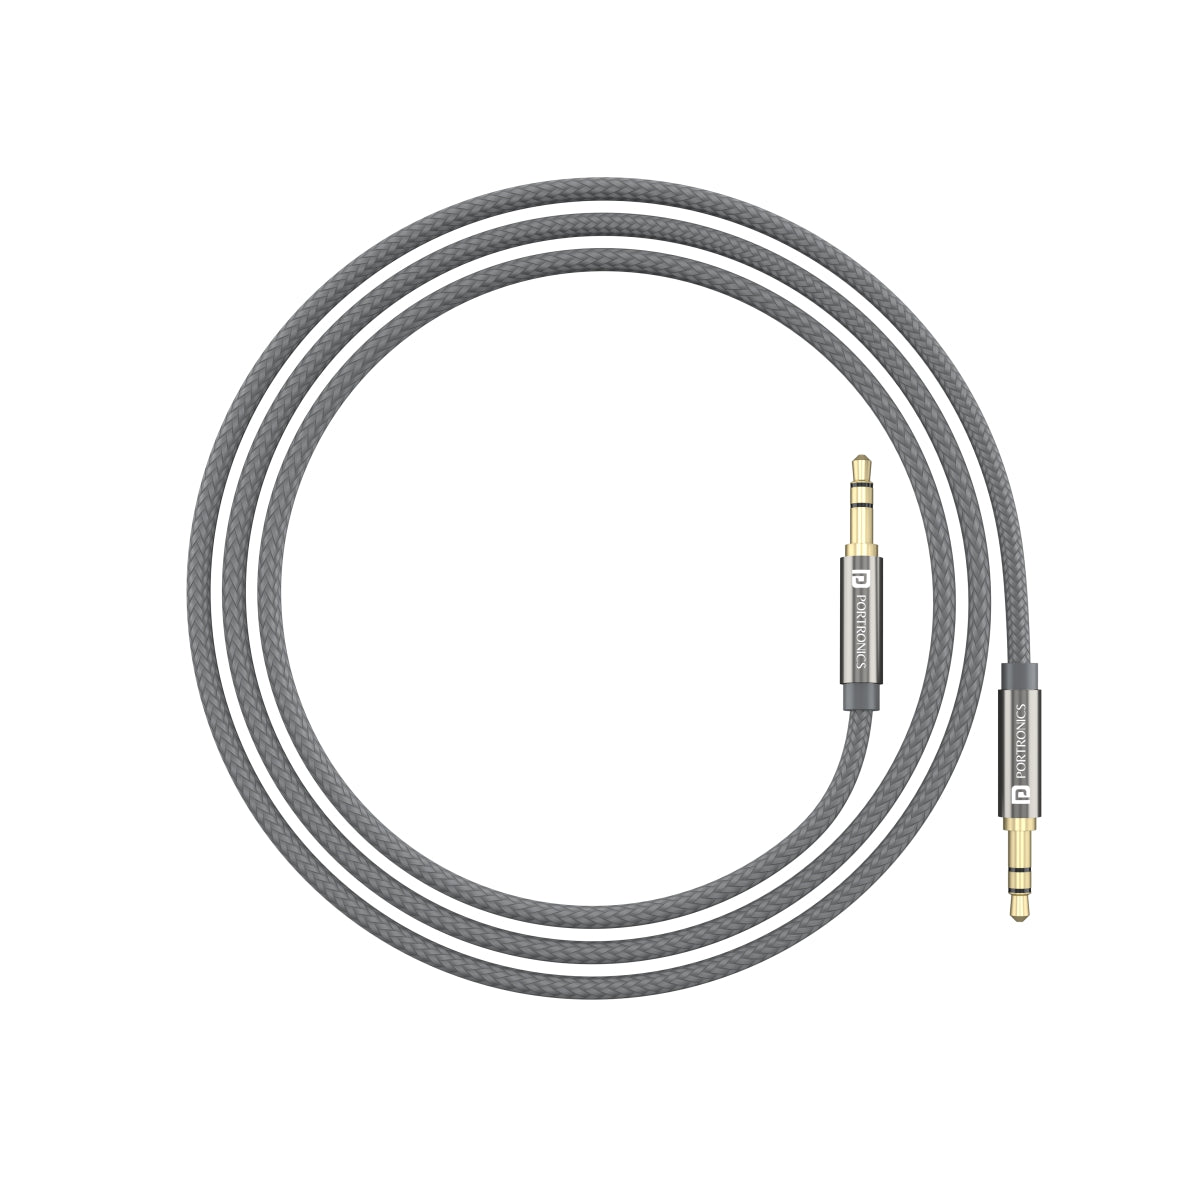 Aux Cables - Buy Aux Cables Online Starting at Just ₹14